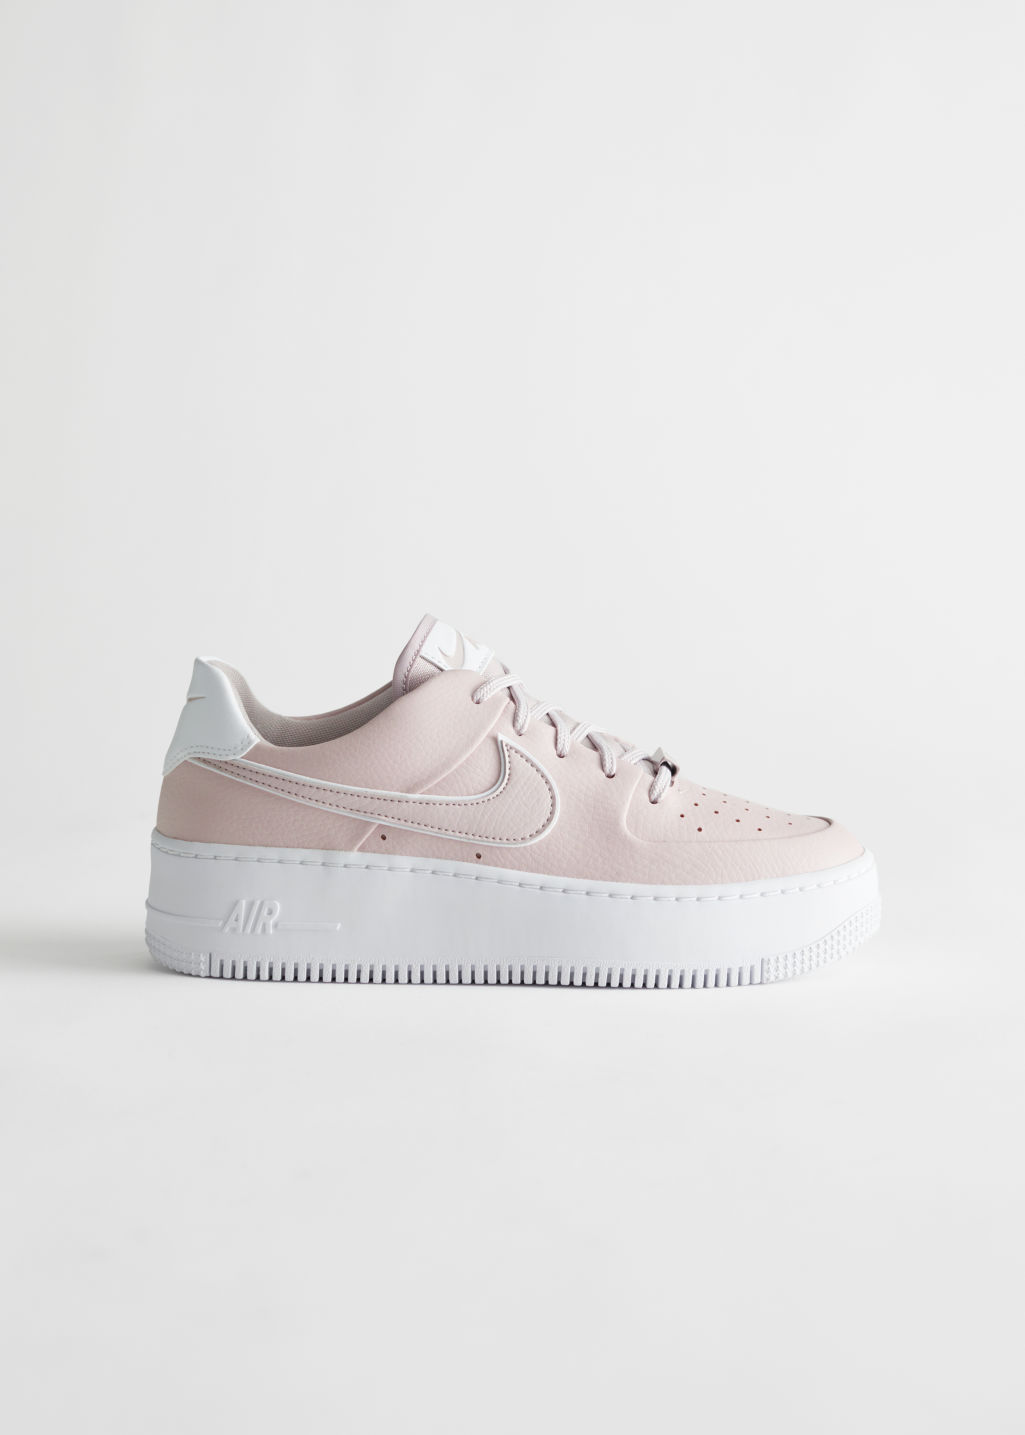 Nike Air Force 1 Sage Low Sneakers - Light Beige - Nike - & Other Stories - Click Image to Close